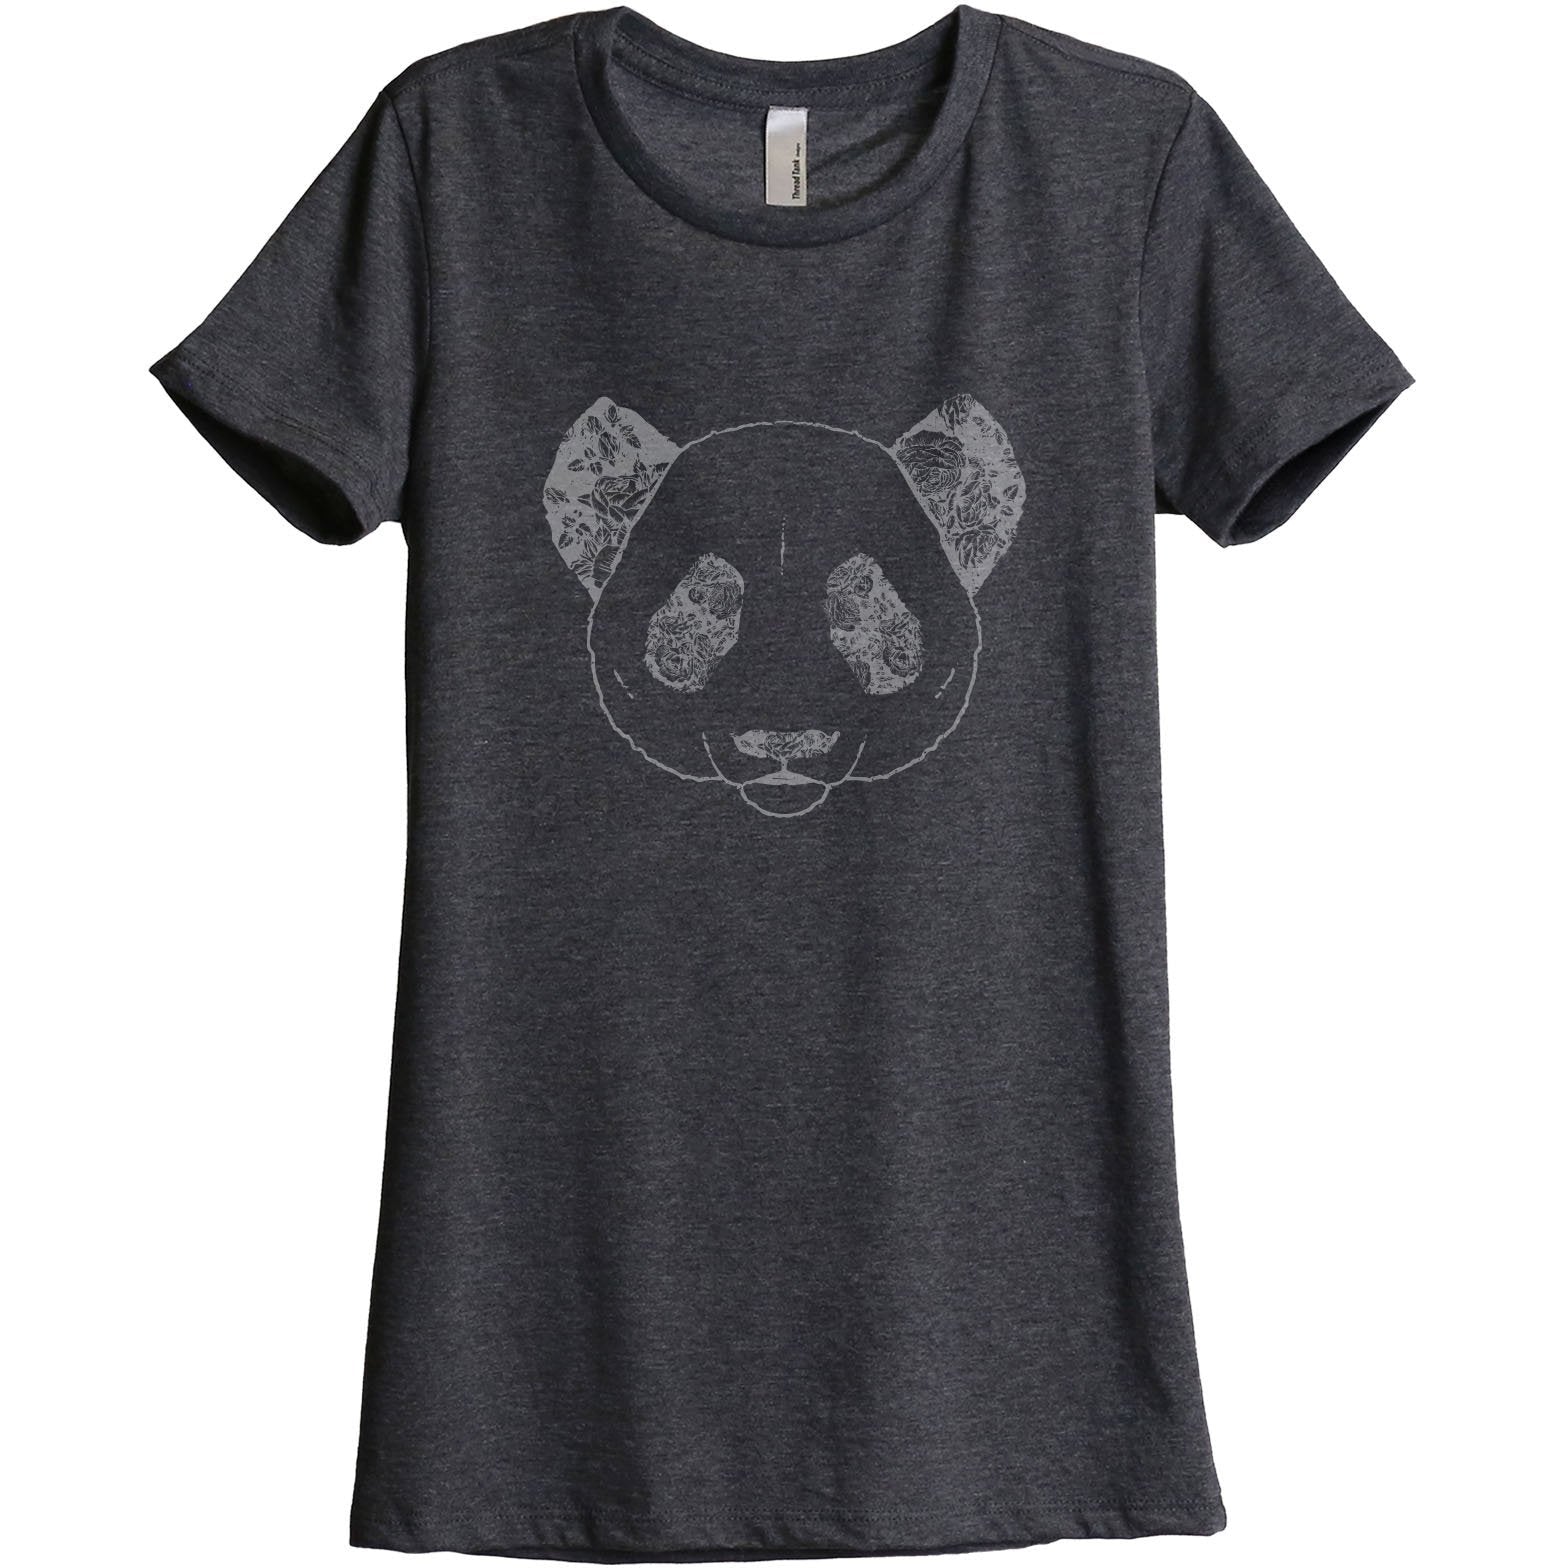 Floral Panda - Thread Tank | Stories You Can Wear | T-Shirts, Tank Tops and Sweatshirts